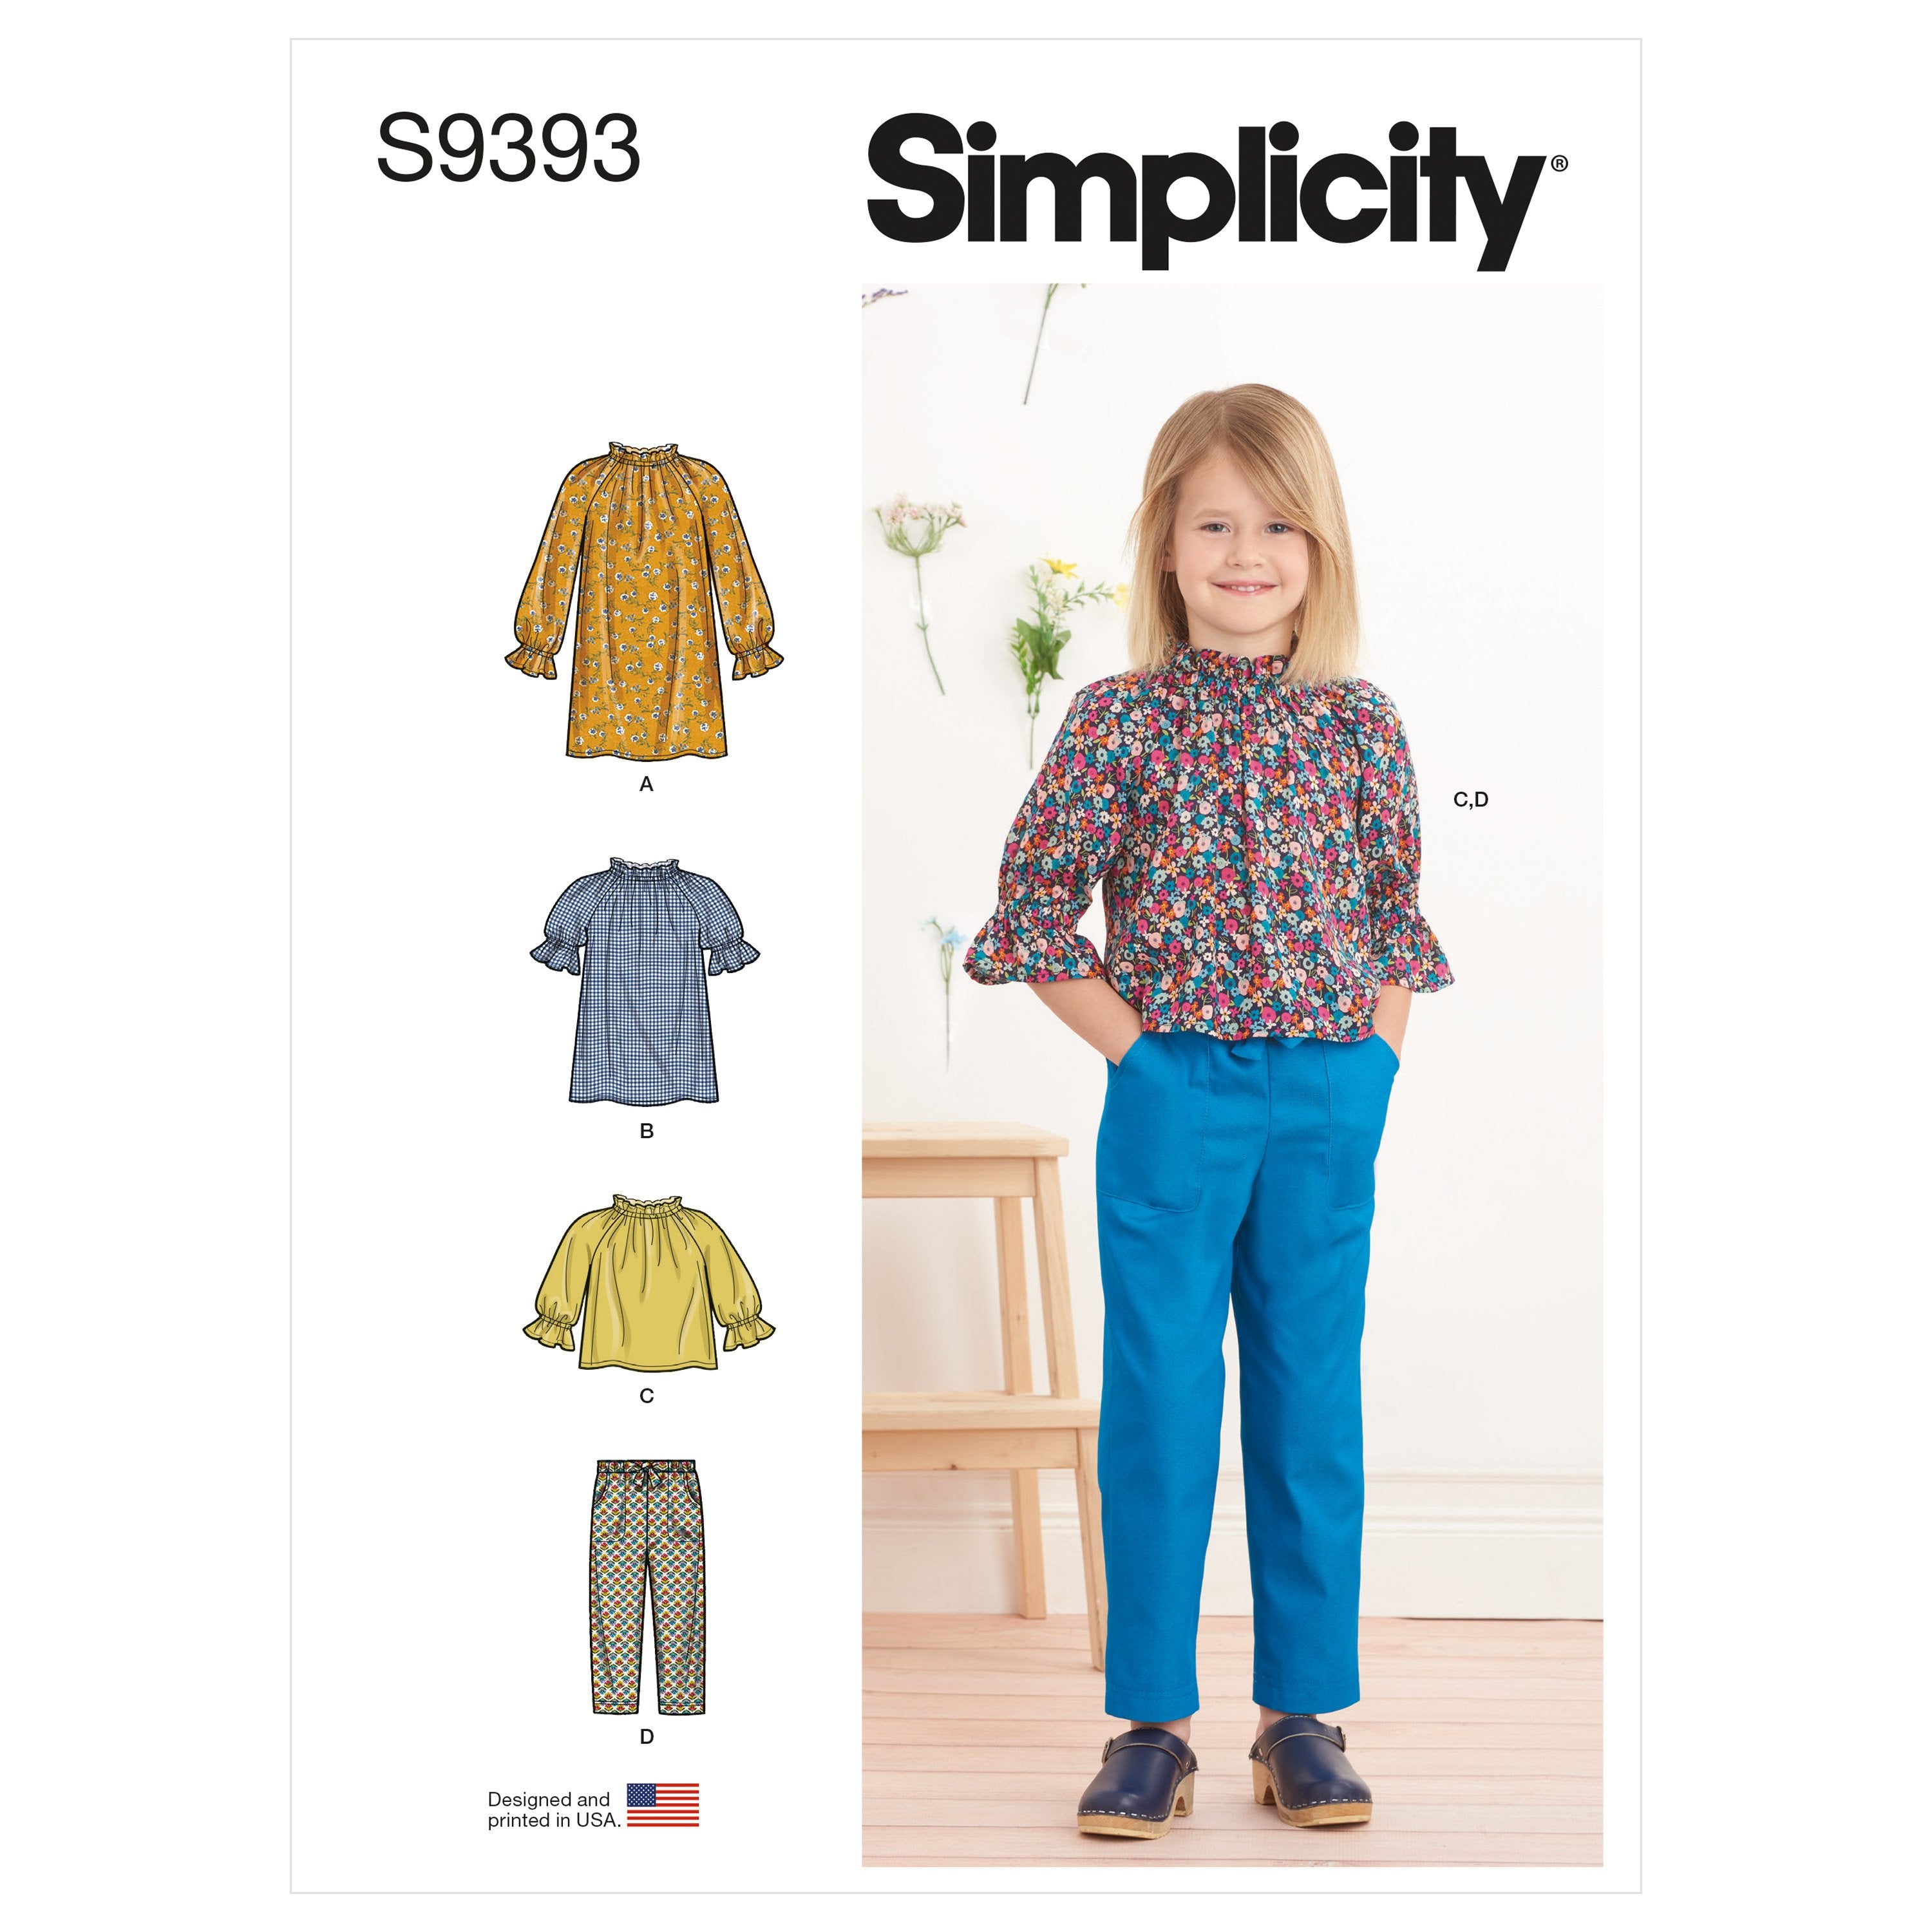 Simplicity Sewing Pattern 9393 Children's Dress, Tunic, Top and Pants from Jaycotts Sewing Supplies